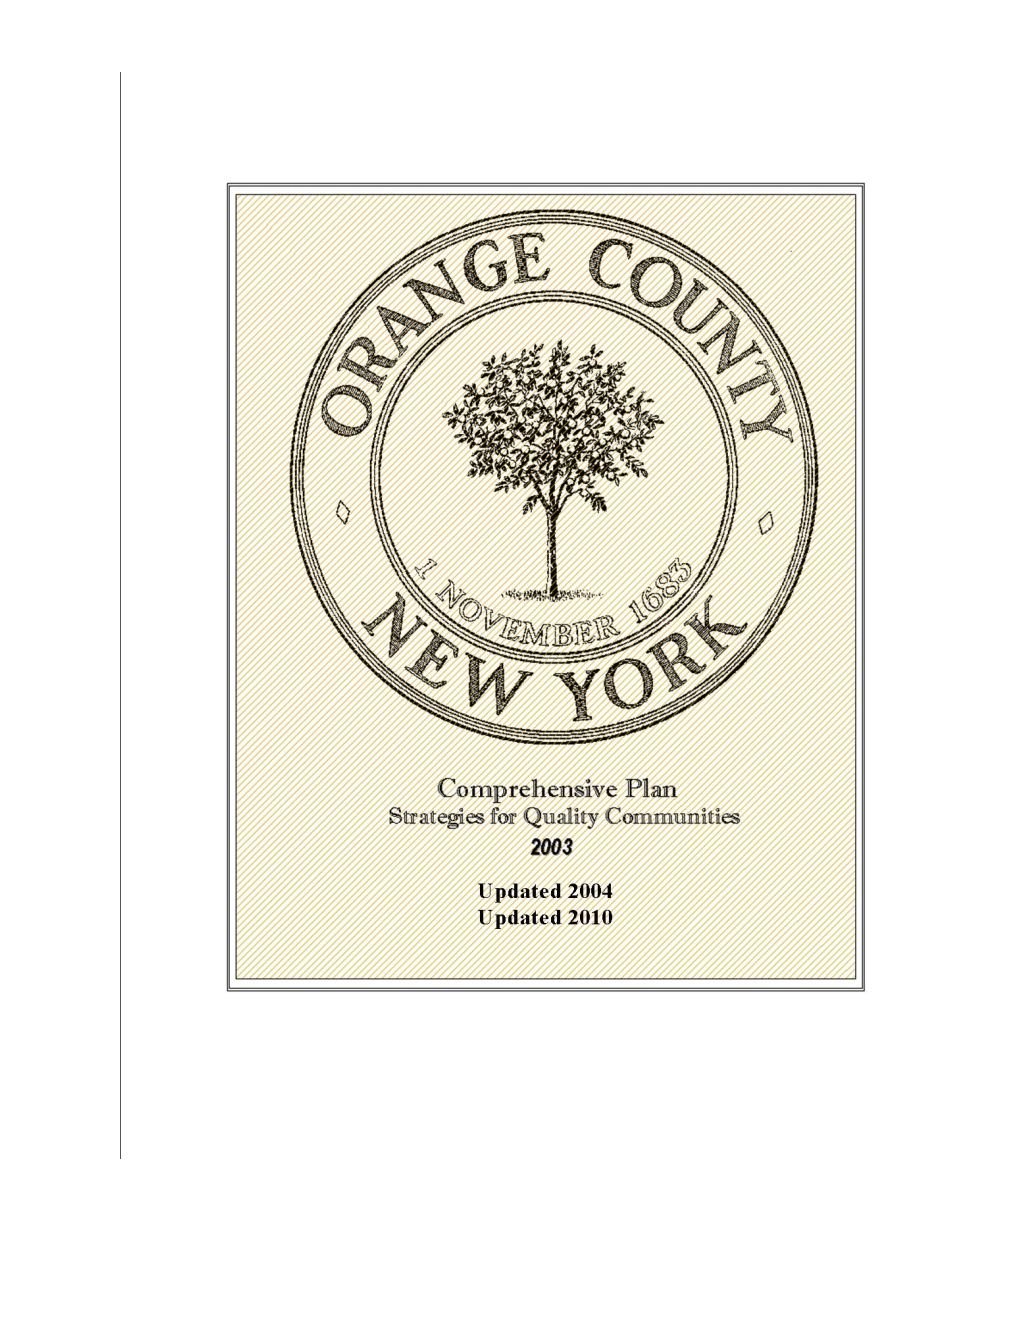 Orange County Comprehensive Plan Strategies for Quality Communities Adopted April 11 2003; Updated June 2004 and October 2010